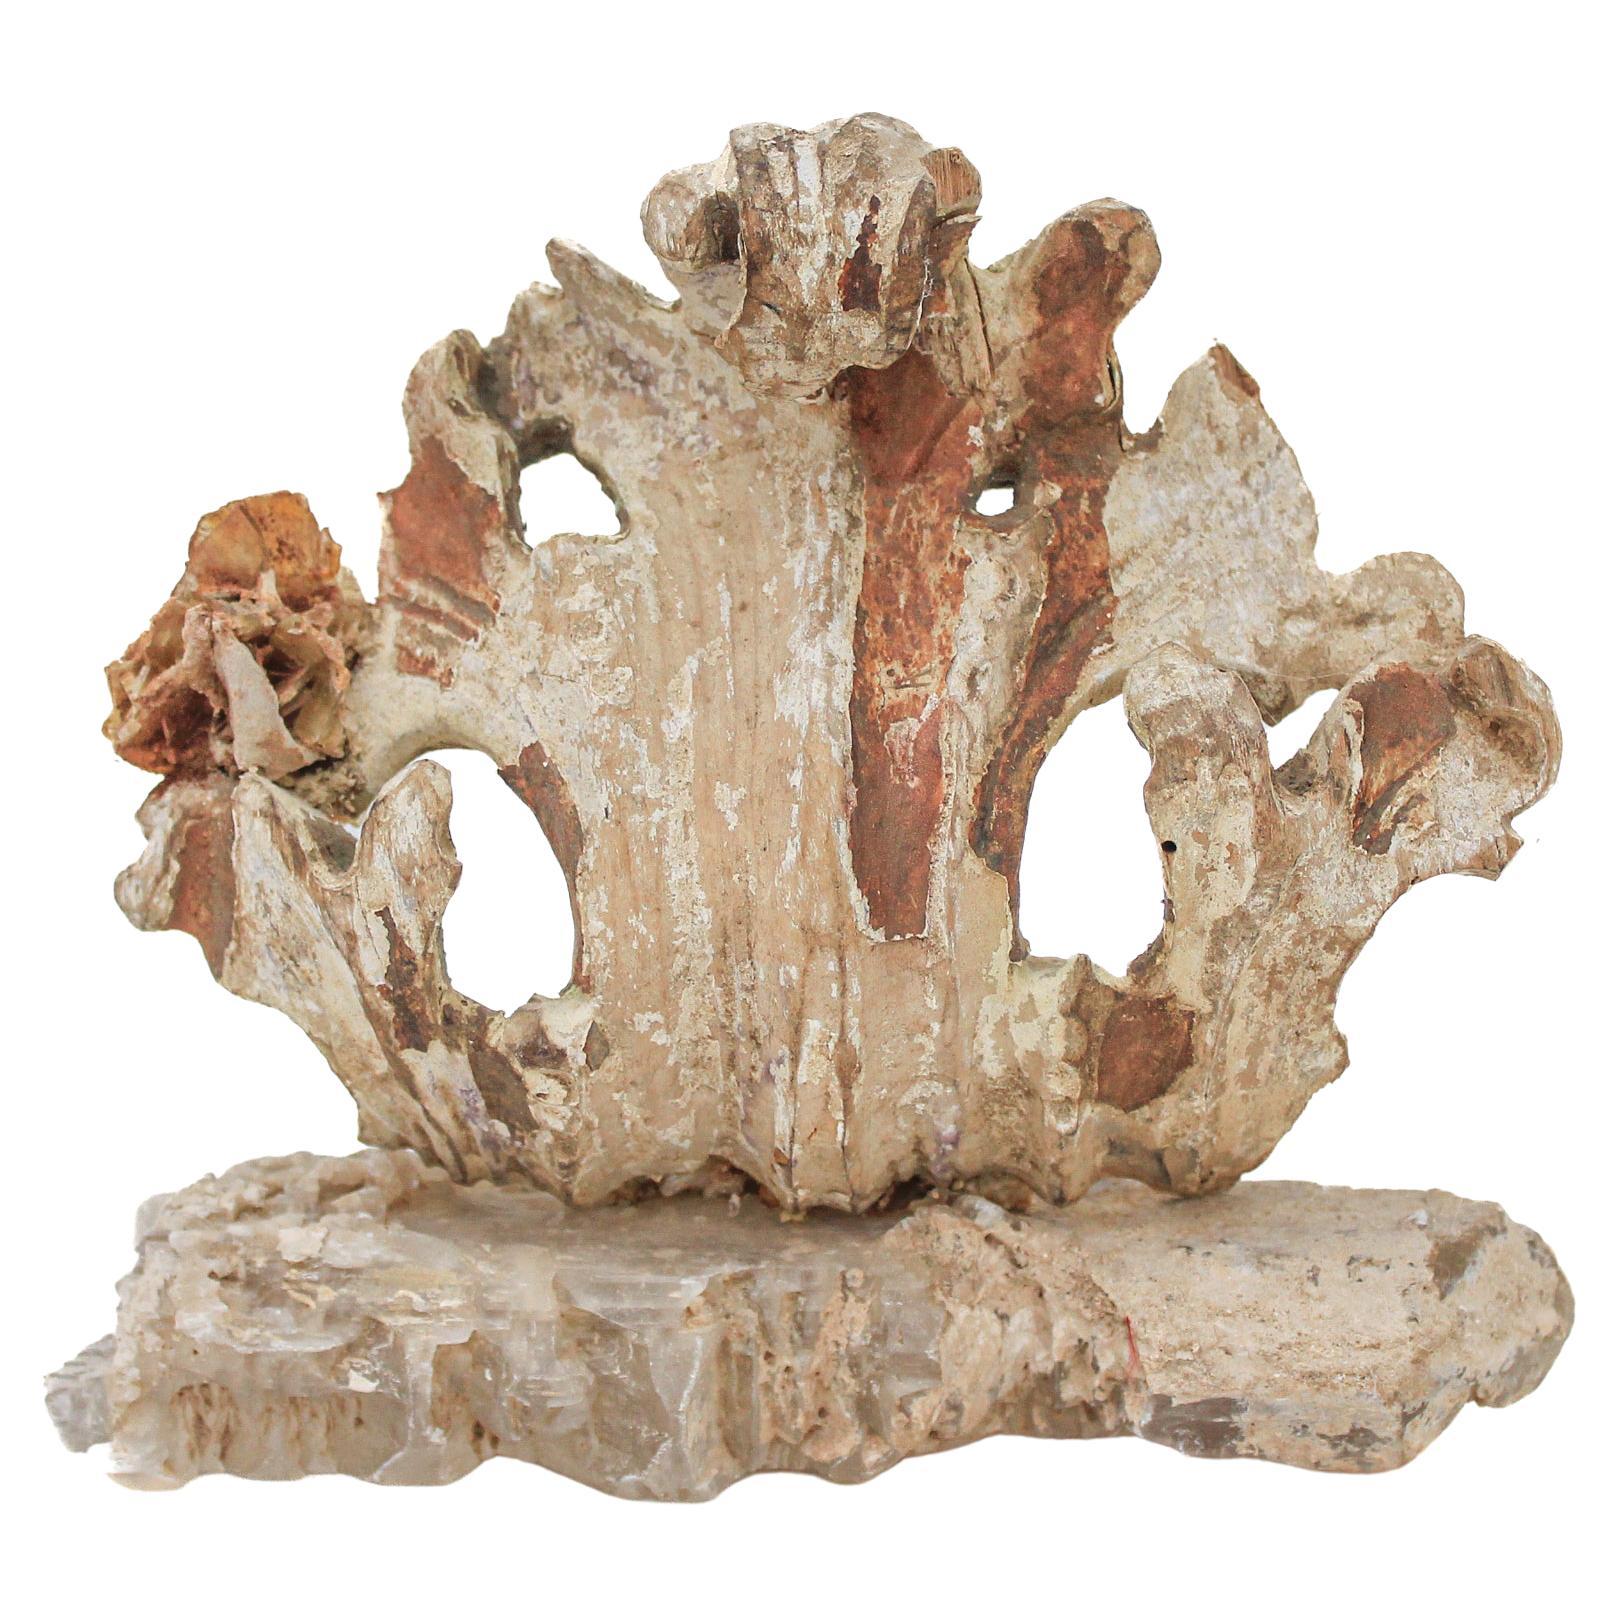 17th Century 'Florence Fragment' with Wulfenite on a Fishtail Selenite Base